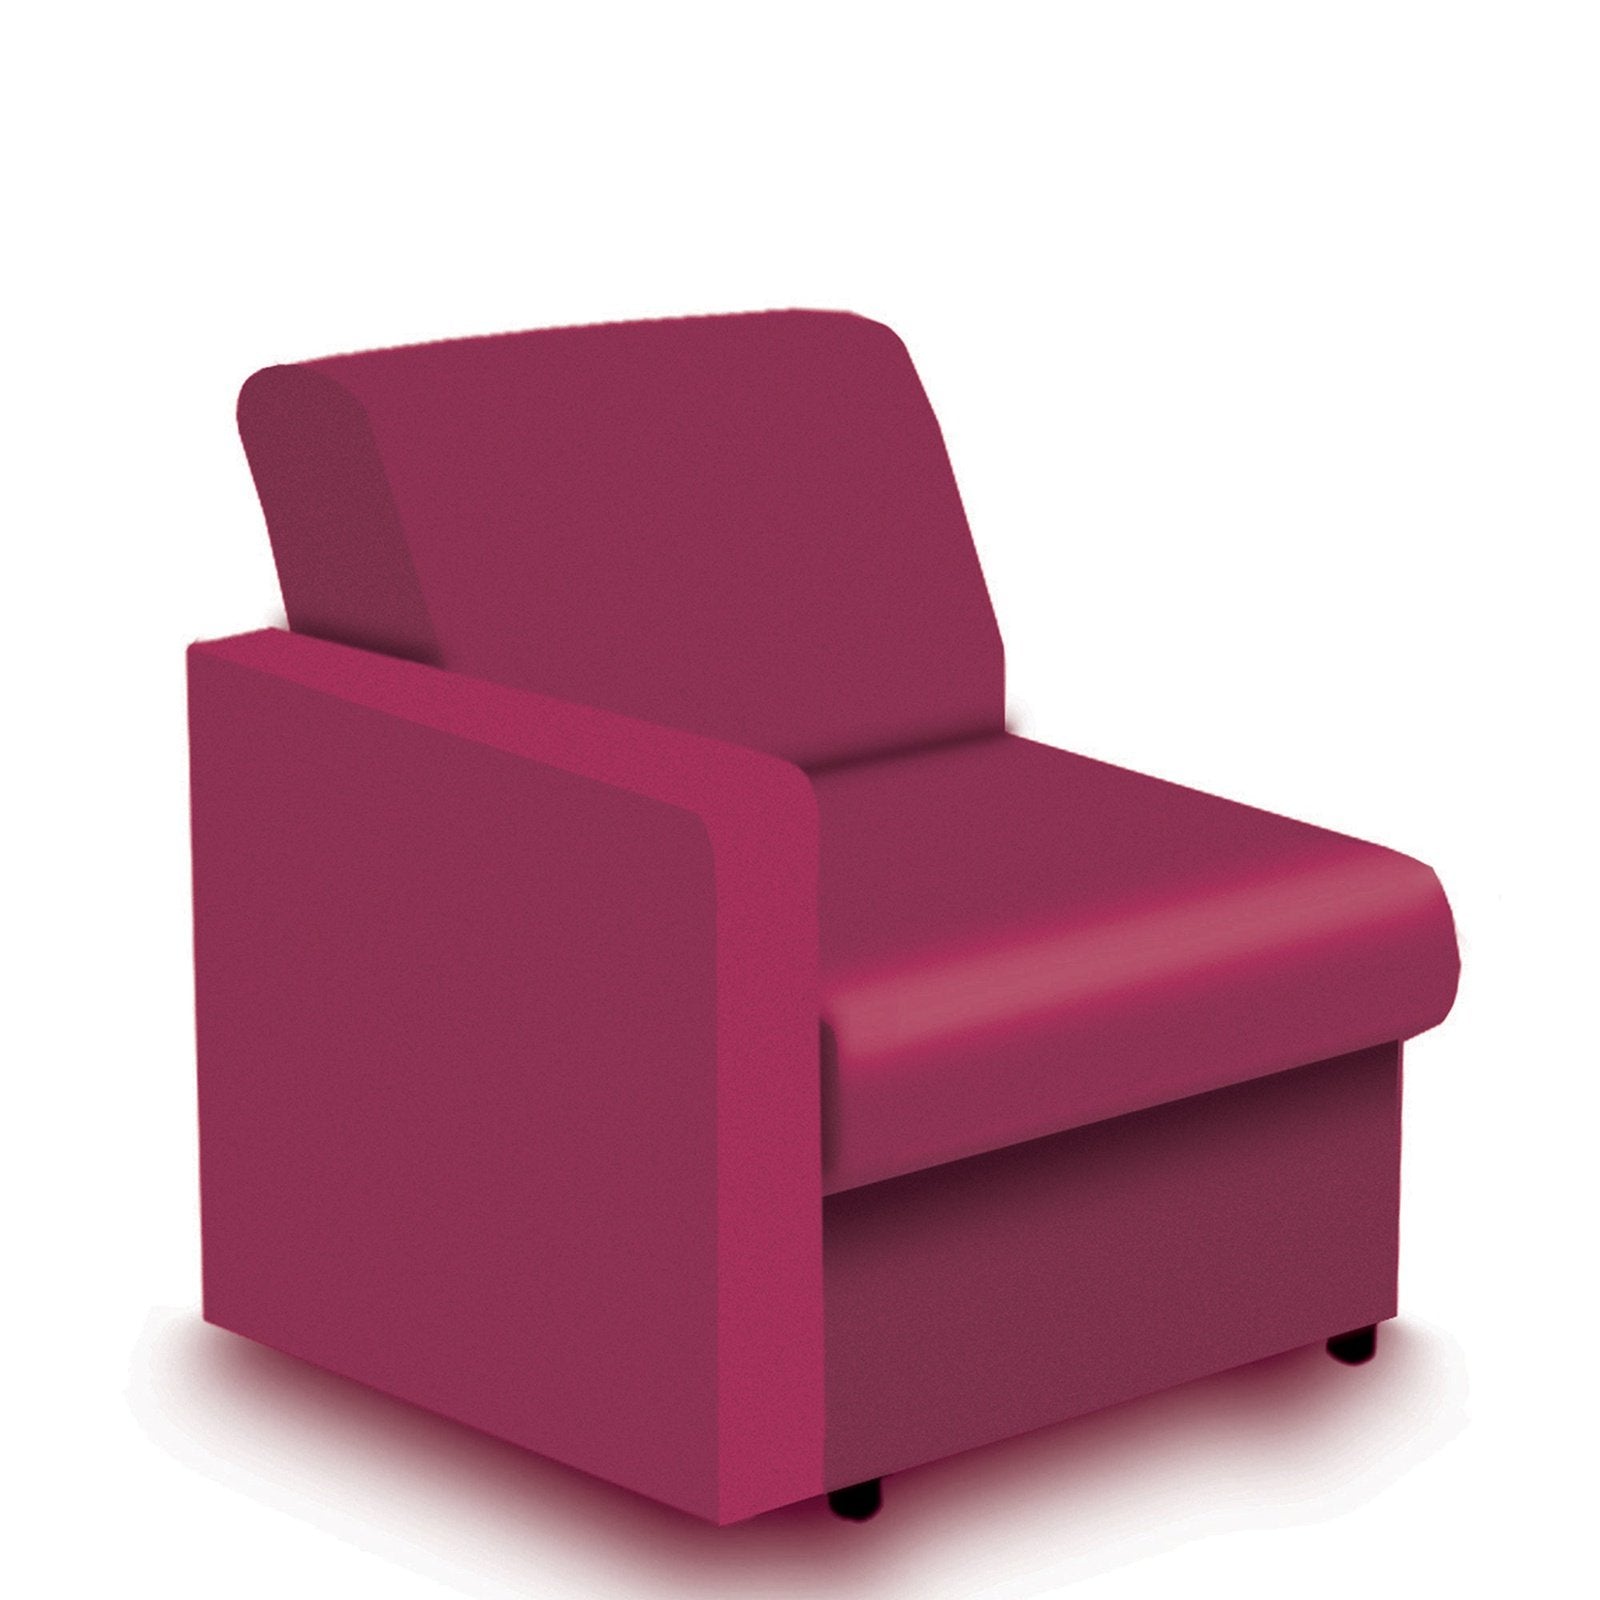 Contemporary Modular Fabric Low Back Sofa - Right Hand Arm - Office Products Online